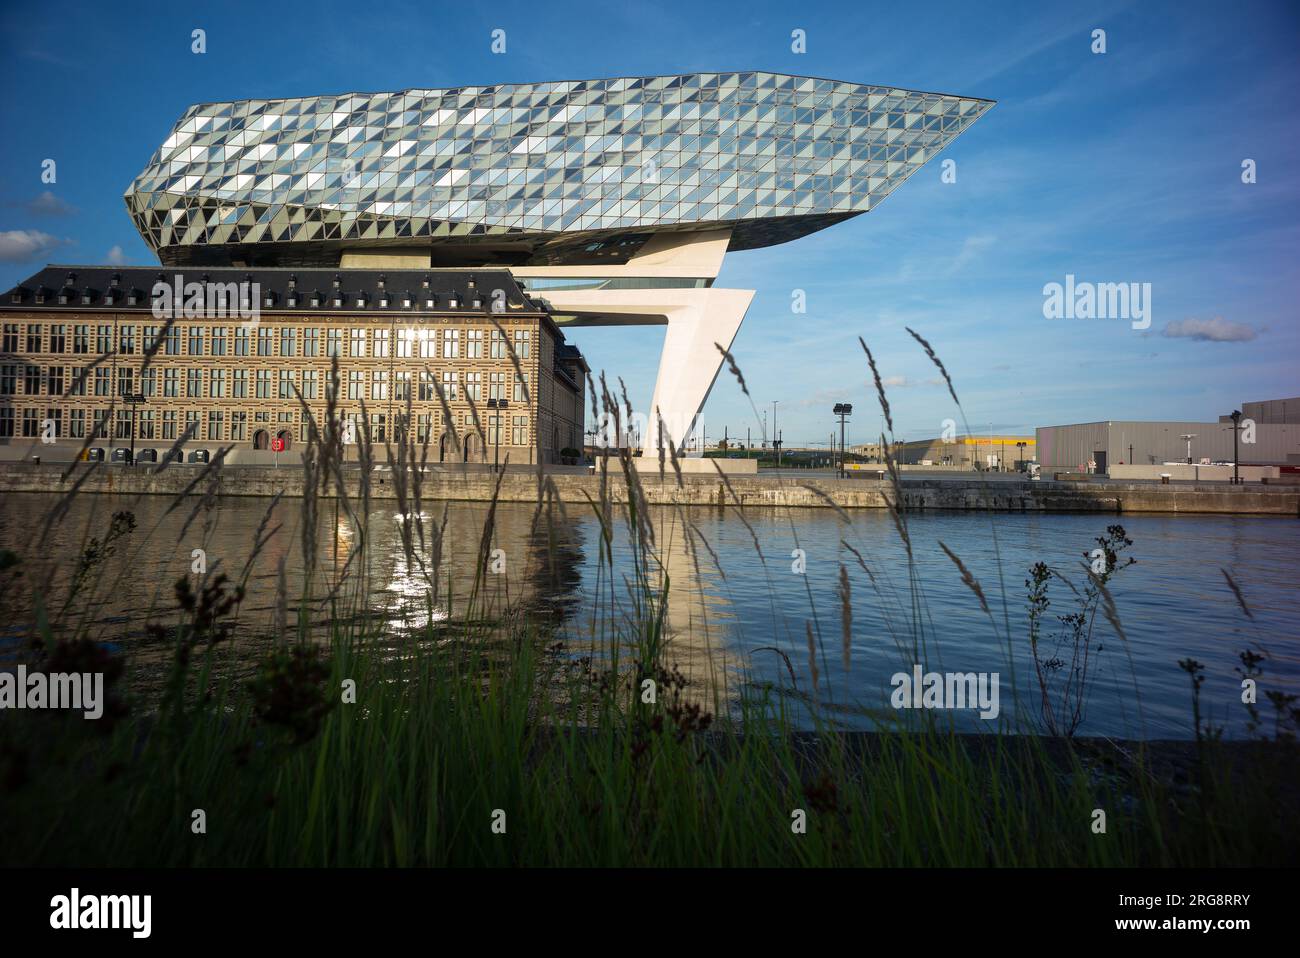 View of the Antwerp Port Authority building, the work of architect Zaha ...